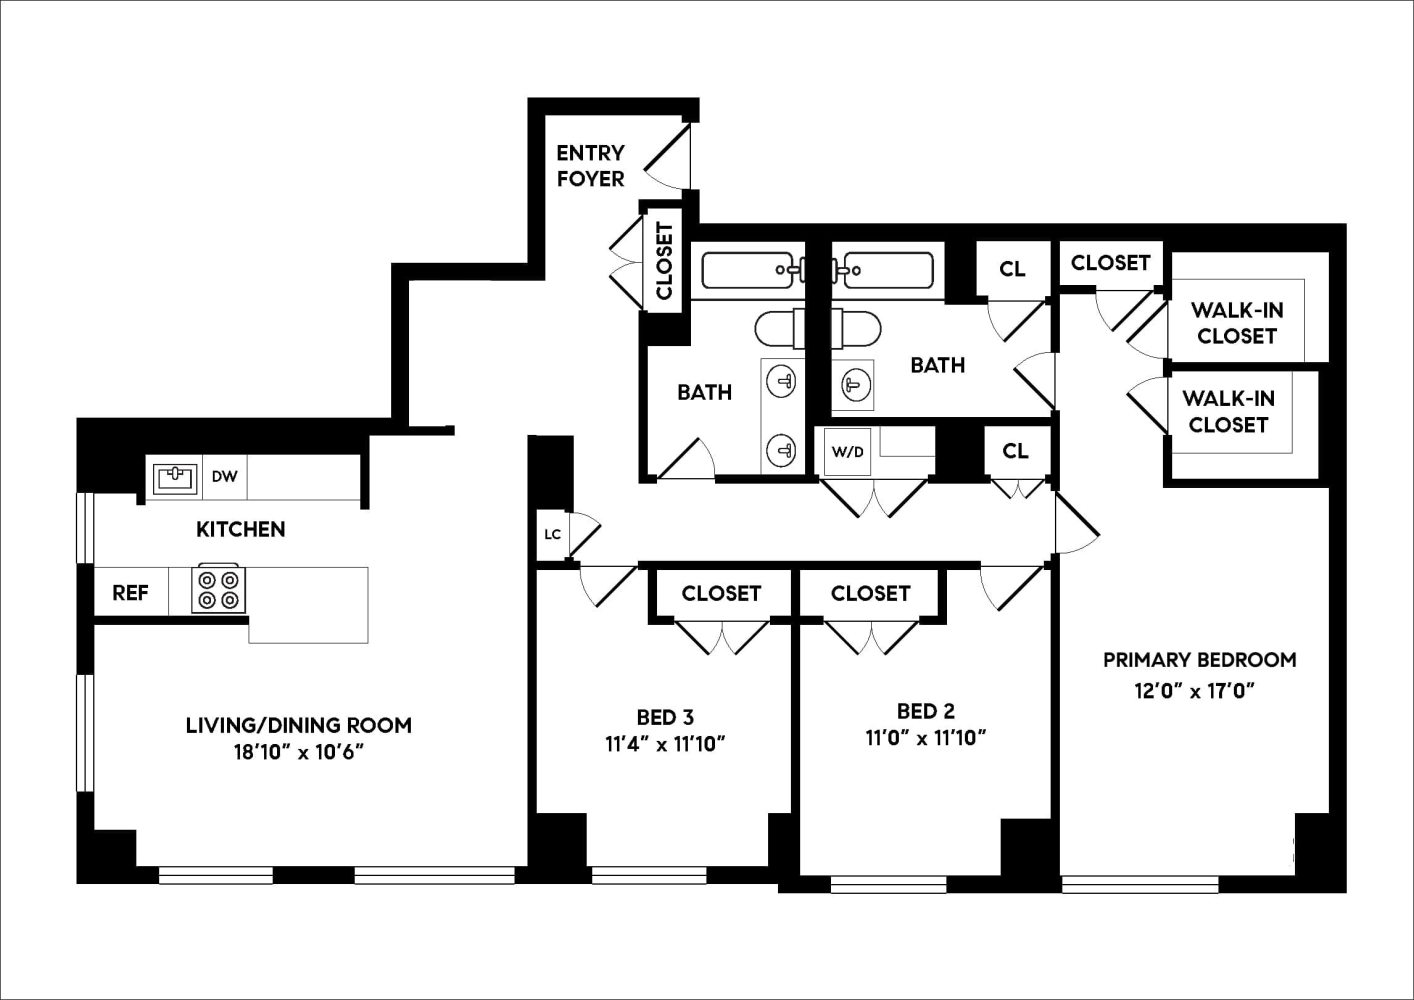 Floorplan for 225 Rector Place, 10M